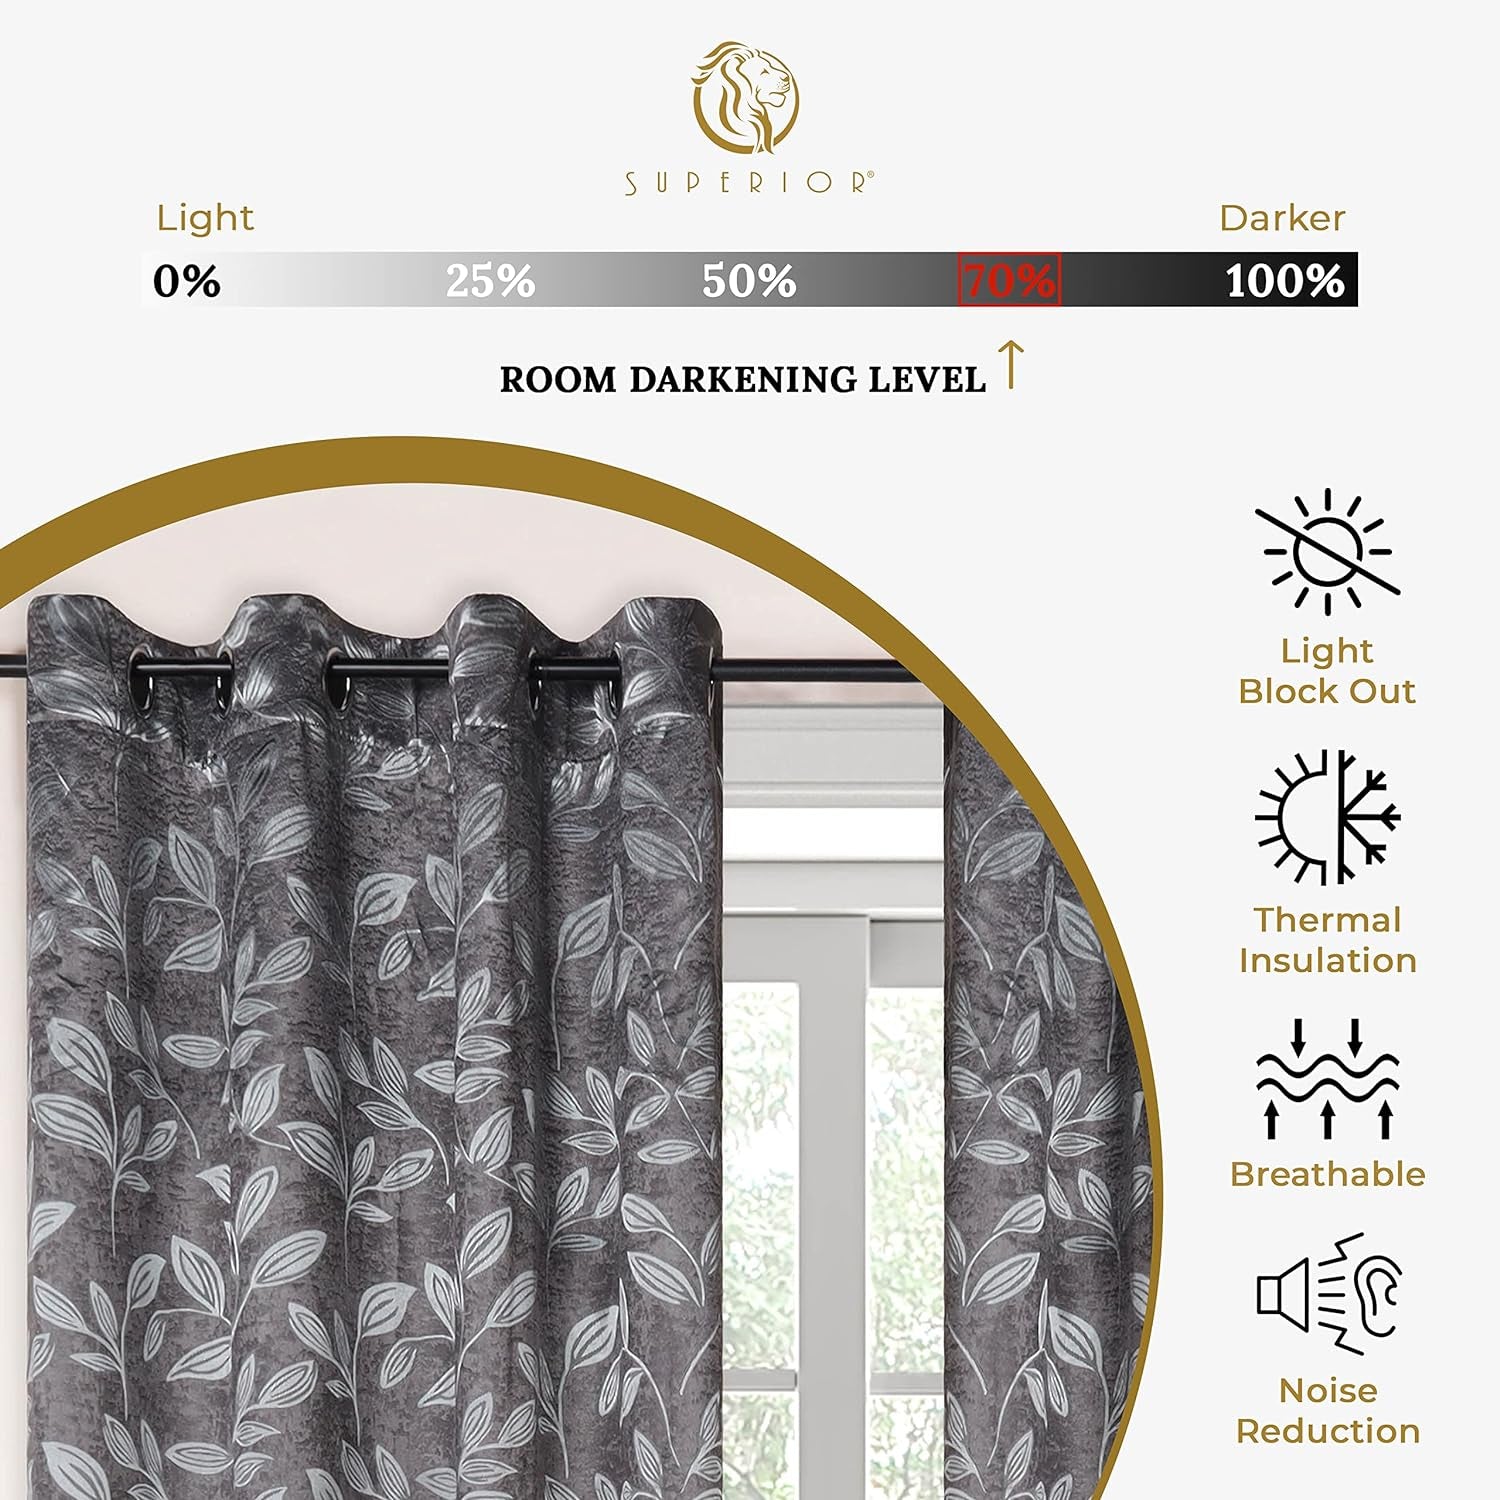 Superior Blackout Curtains, Room Darkening Window Accent for Bedroom, Sun Blocking, Thermal, Modern Bohemian Curtains, Leaves Collection, Set of 2 Panels, Rod Pocket - 52 in X 63 In, Nickel Black  Home City Inc.   